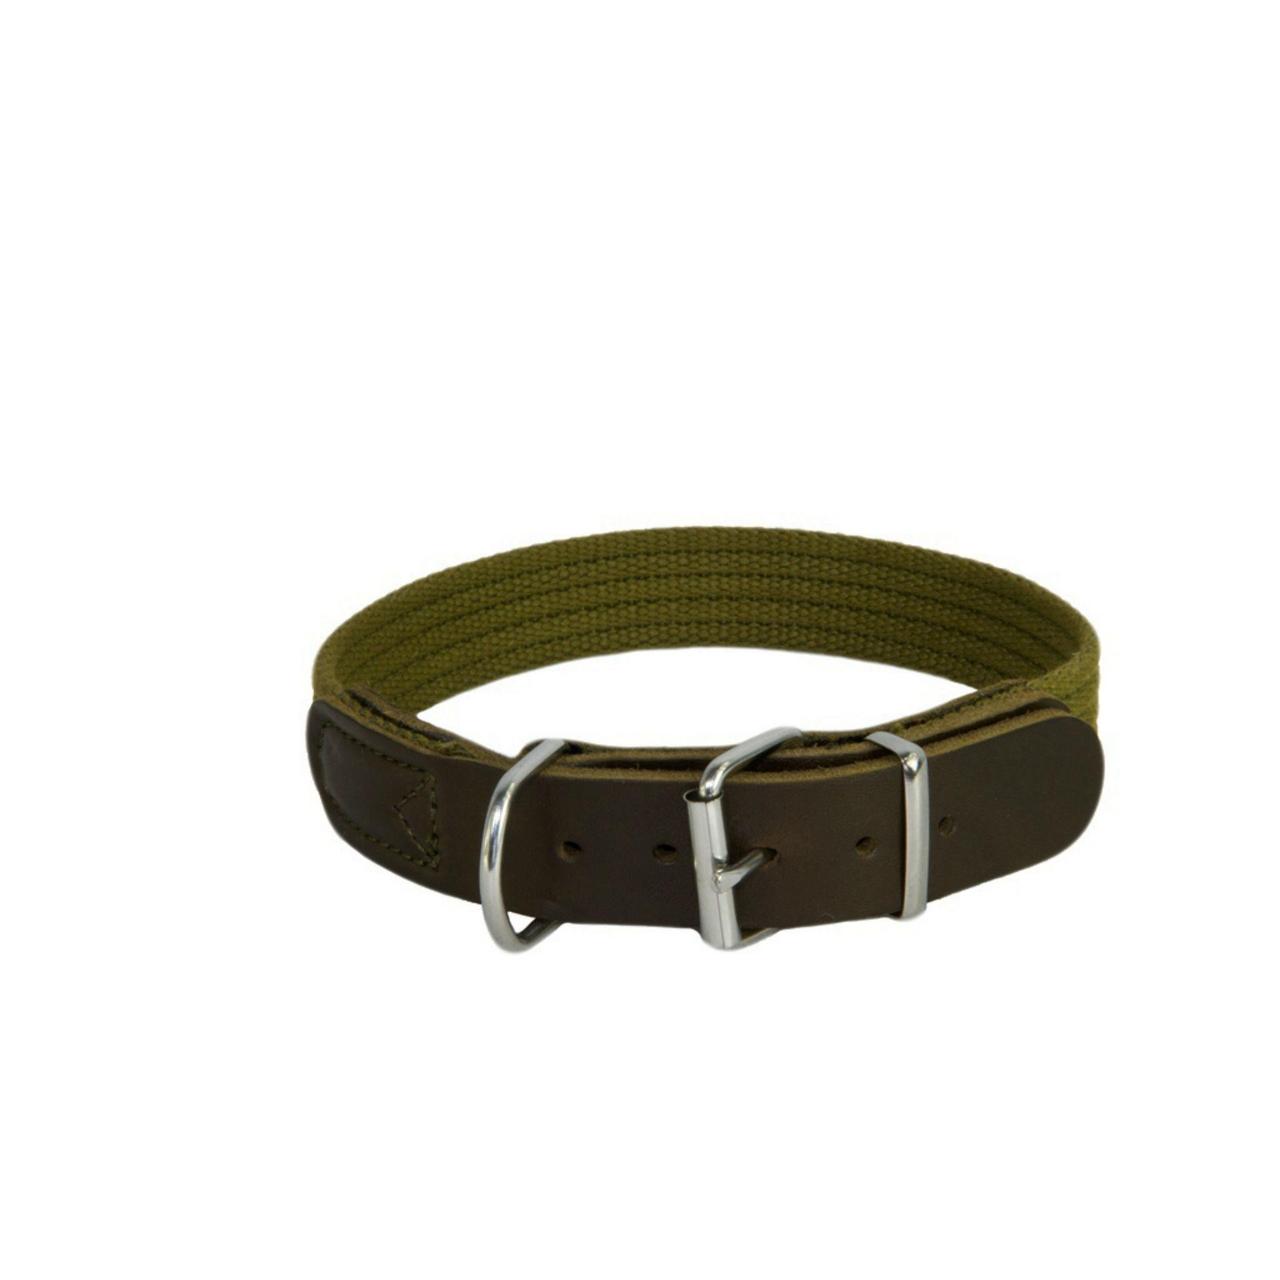 An image of Earthbound Cotton Green Collar 46 - 52cm